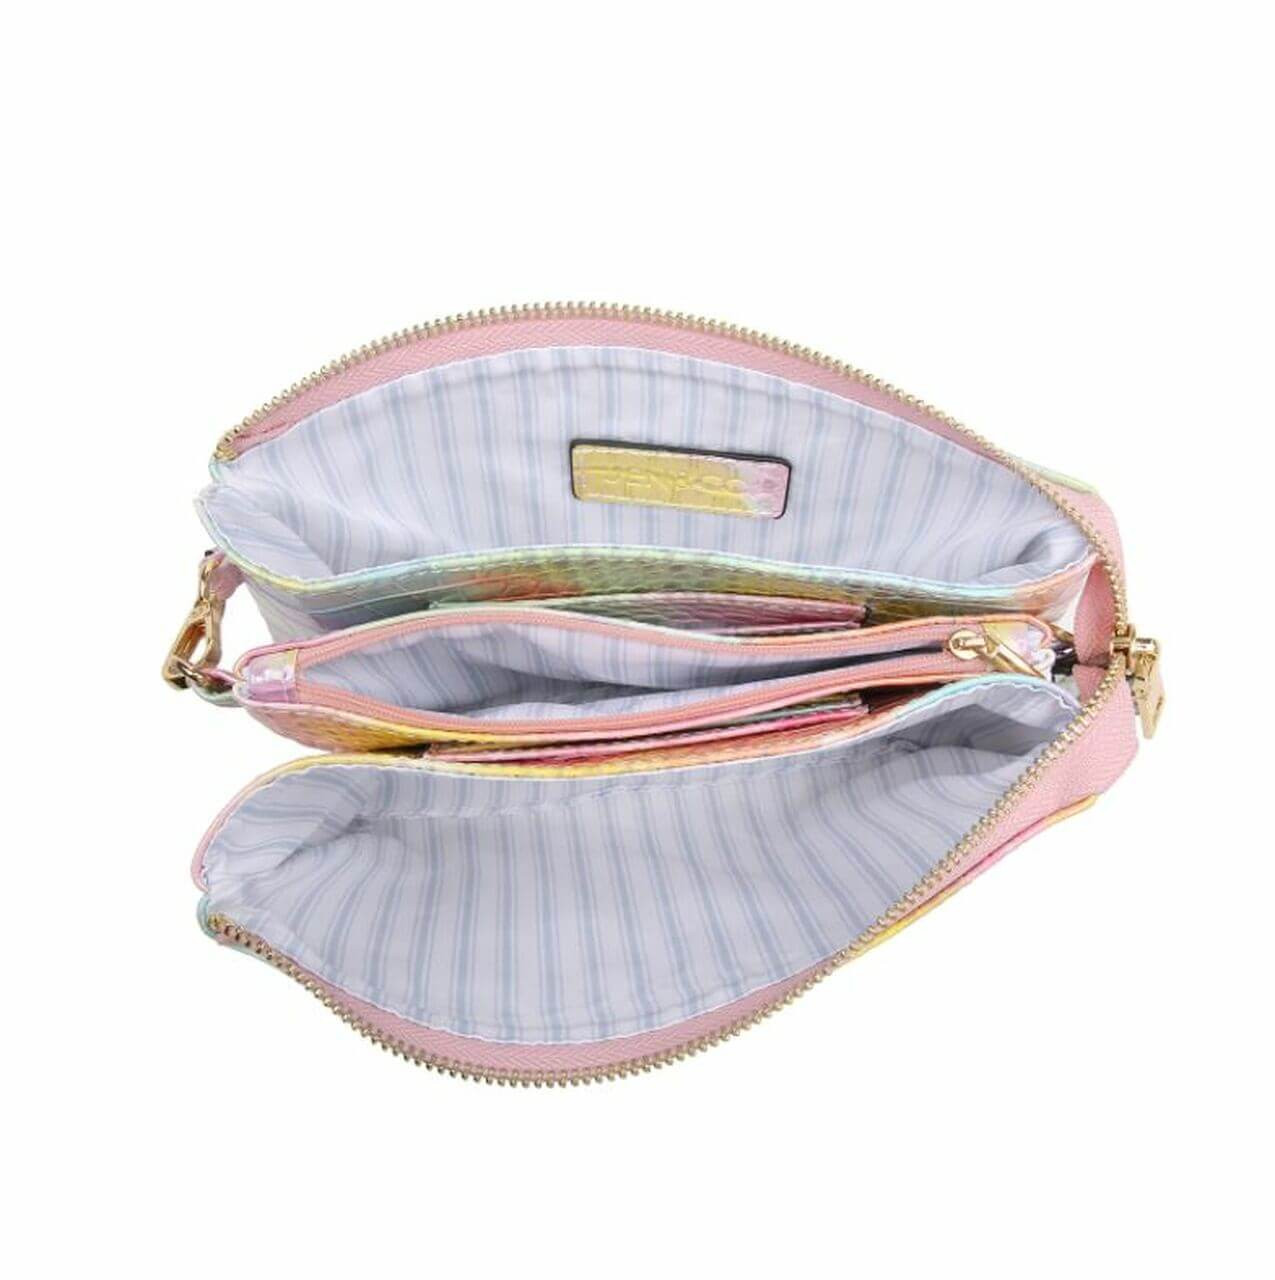 Riley White Wristlet and adjustable crossbody strap included. Three separate interior compartments with six credit card slots. Top zipper closure.